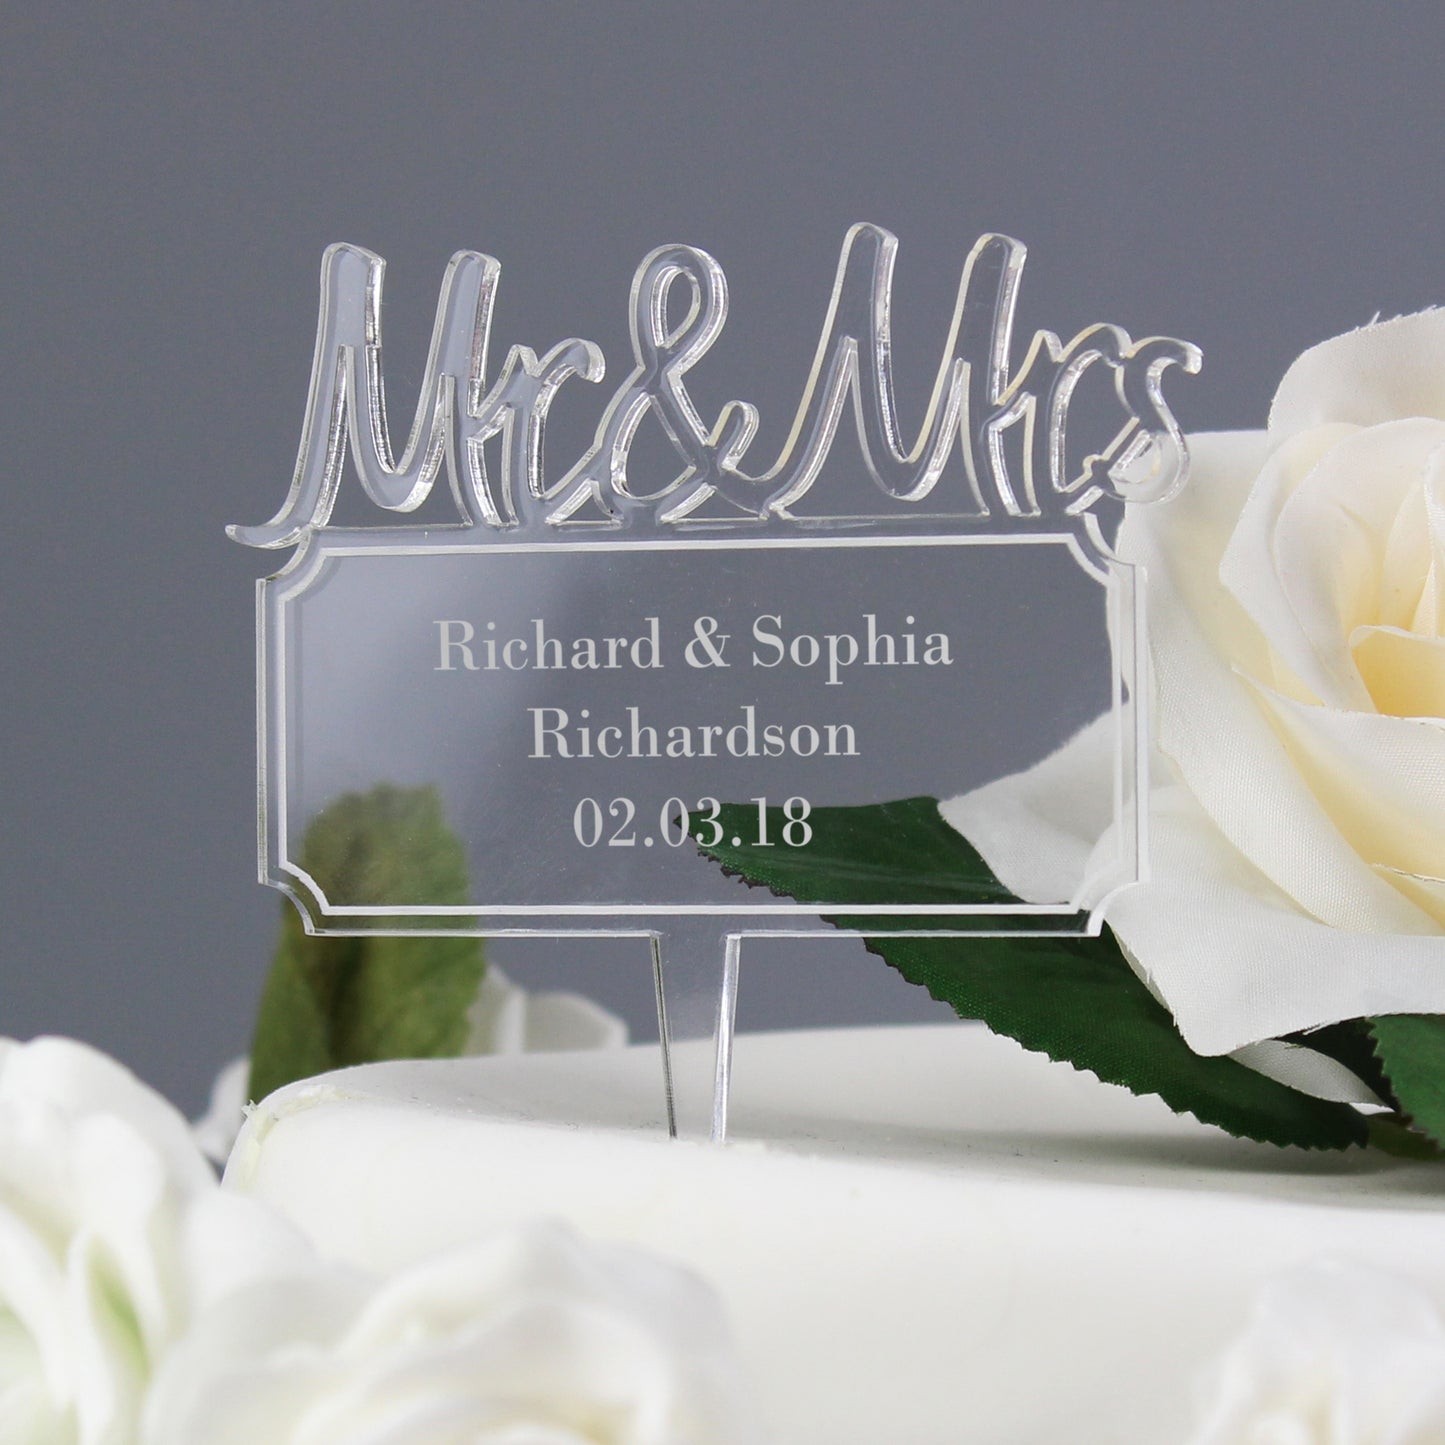 personalised acrylic cake topper